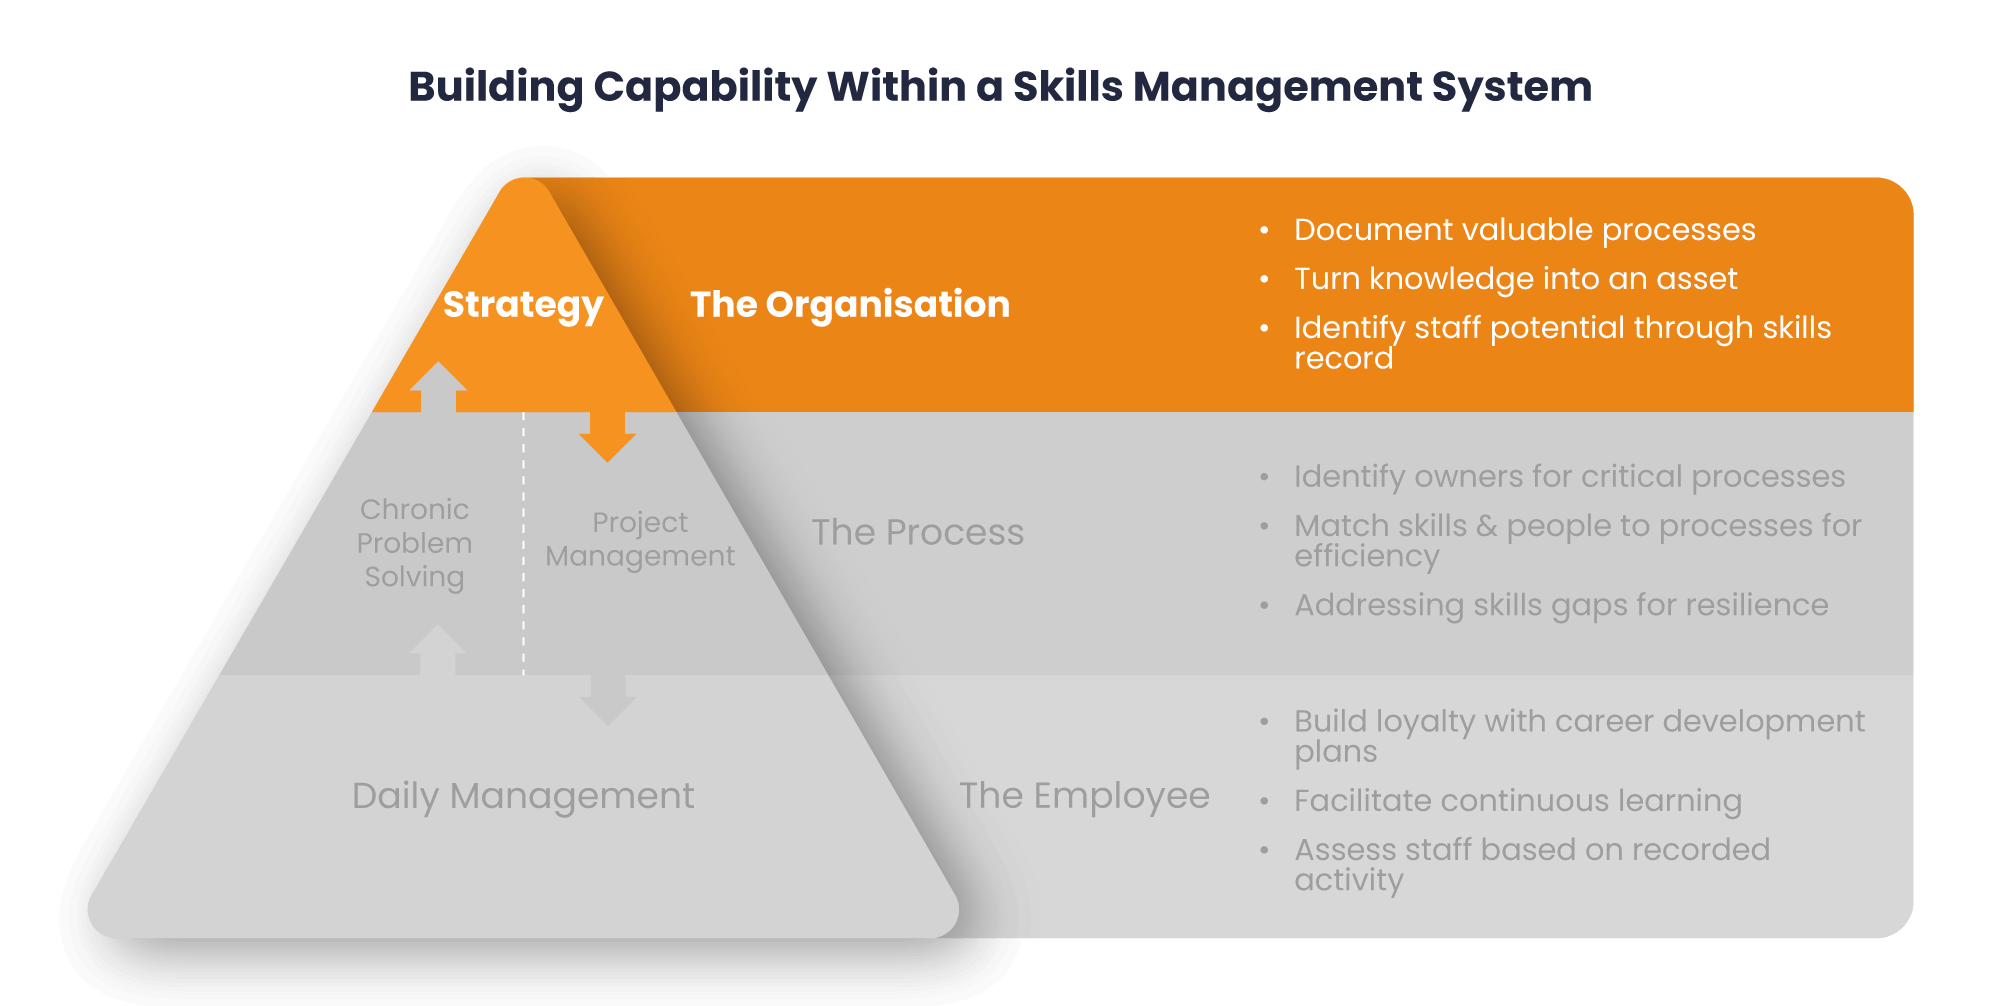 Building Capability within Skills Management